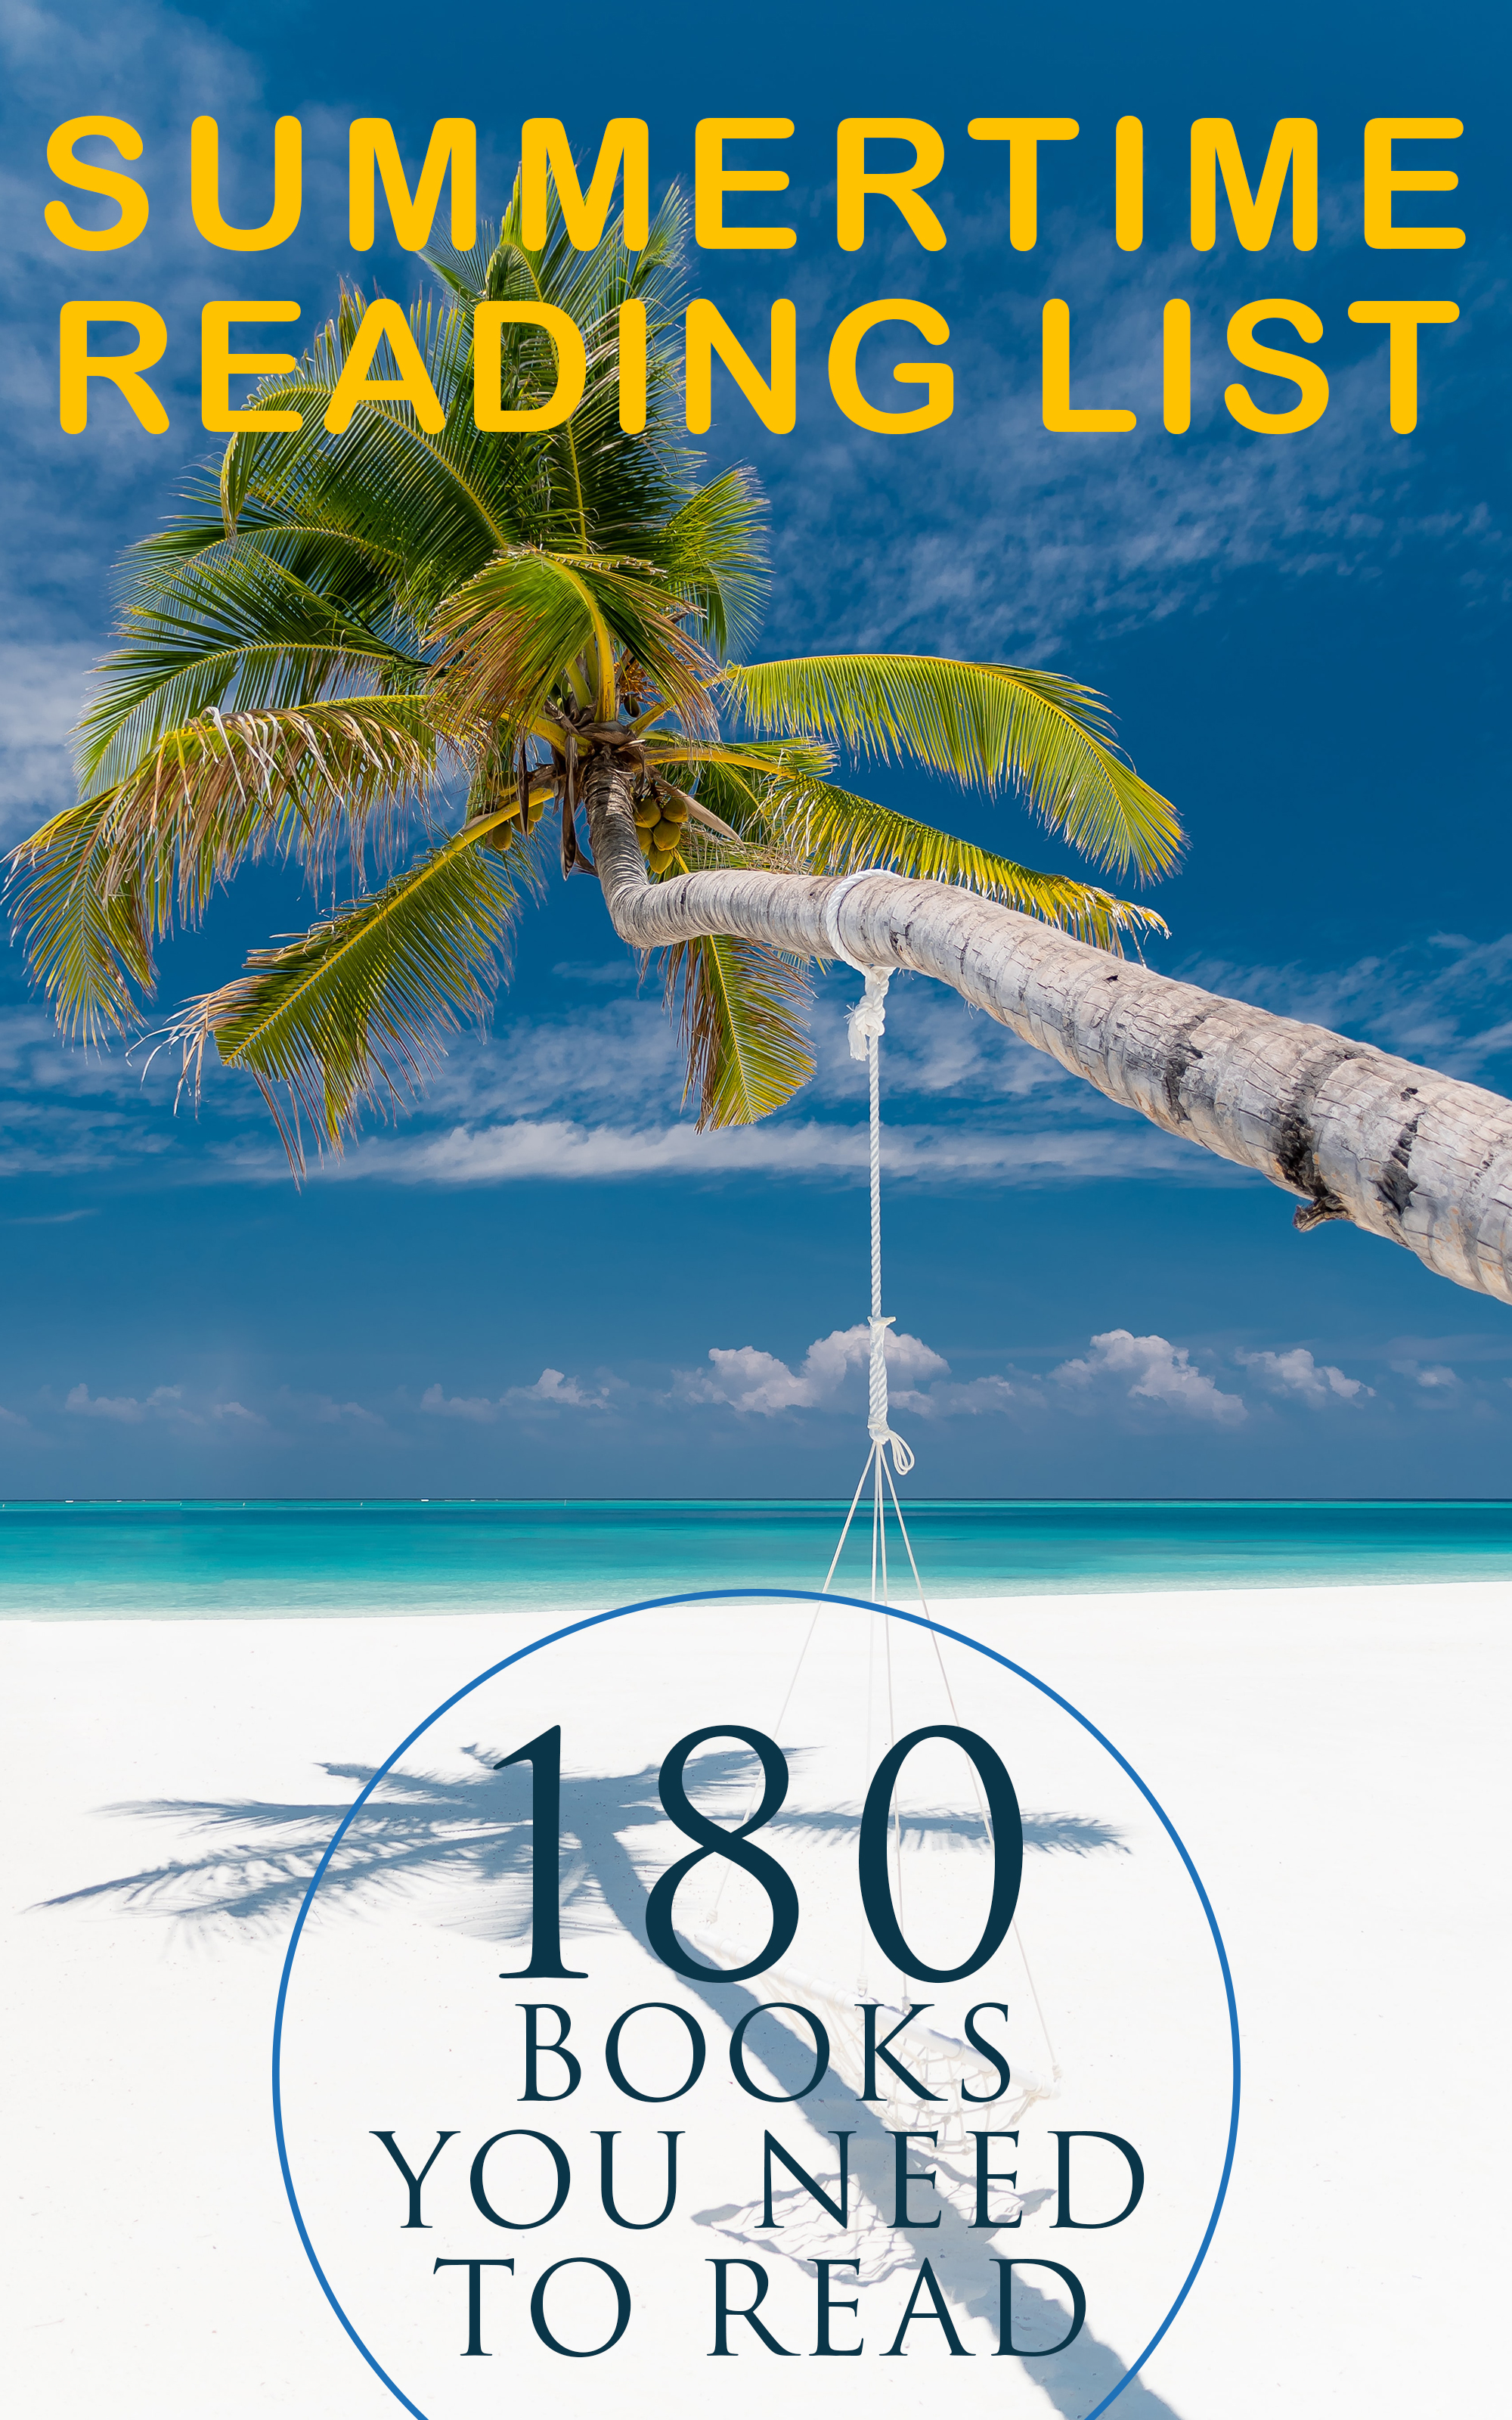 Summertime Reading List: 180 Books You Need to Read (Vol.I)